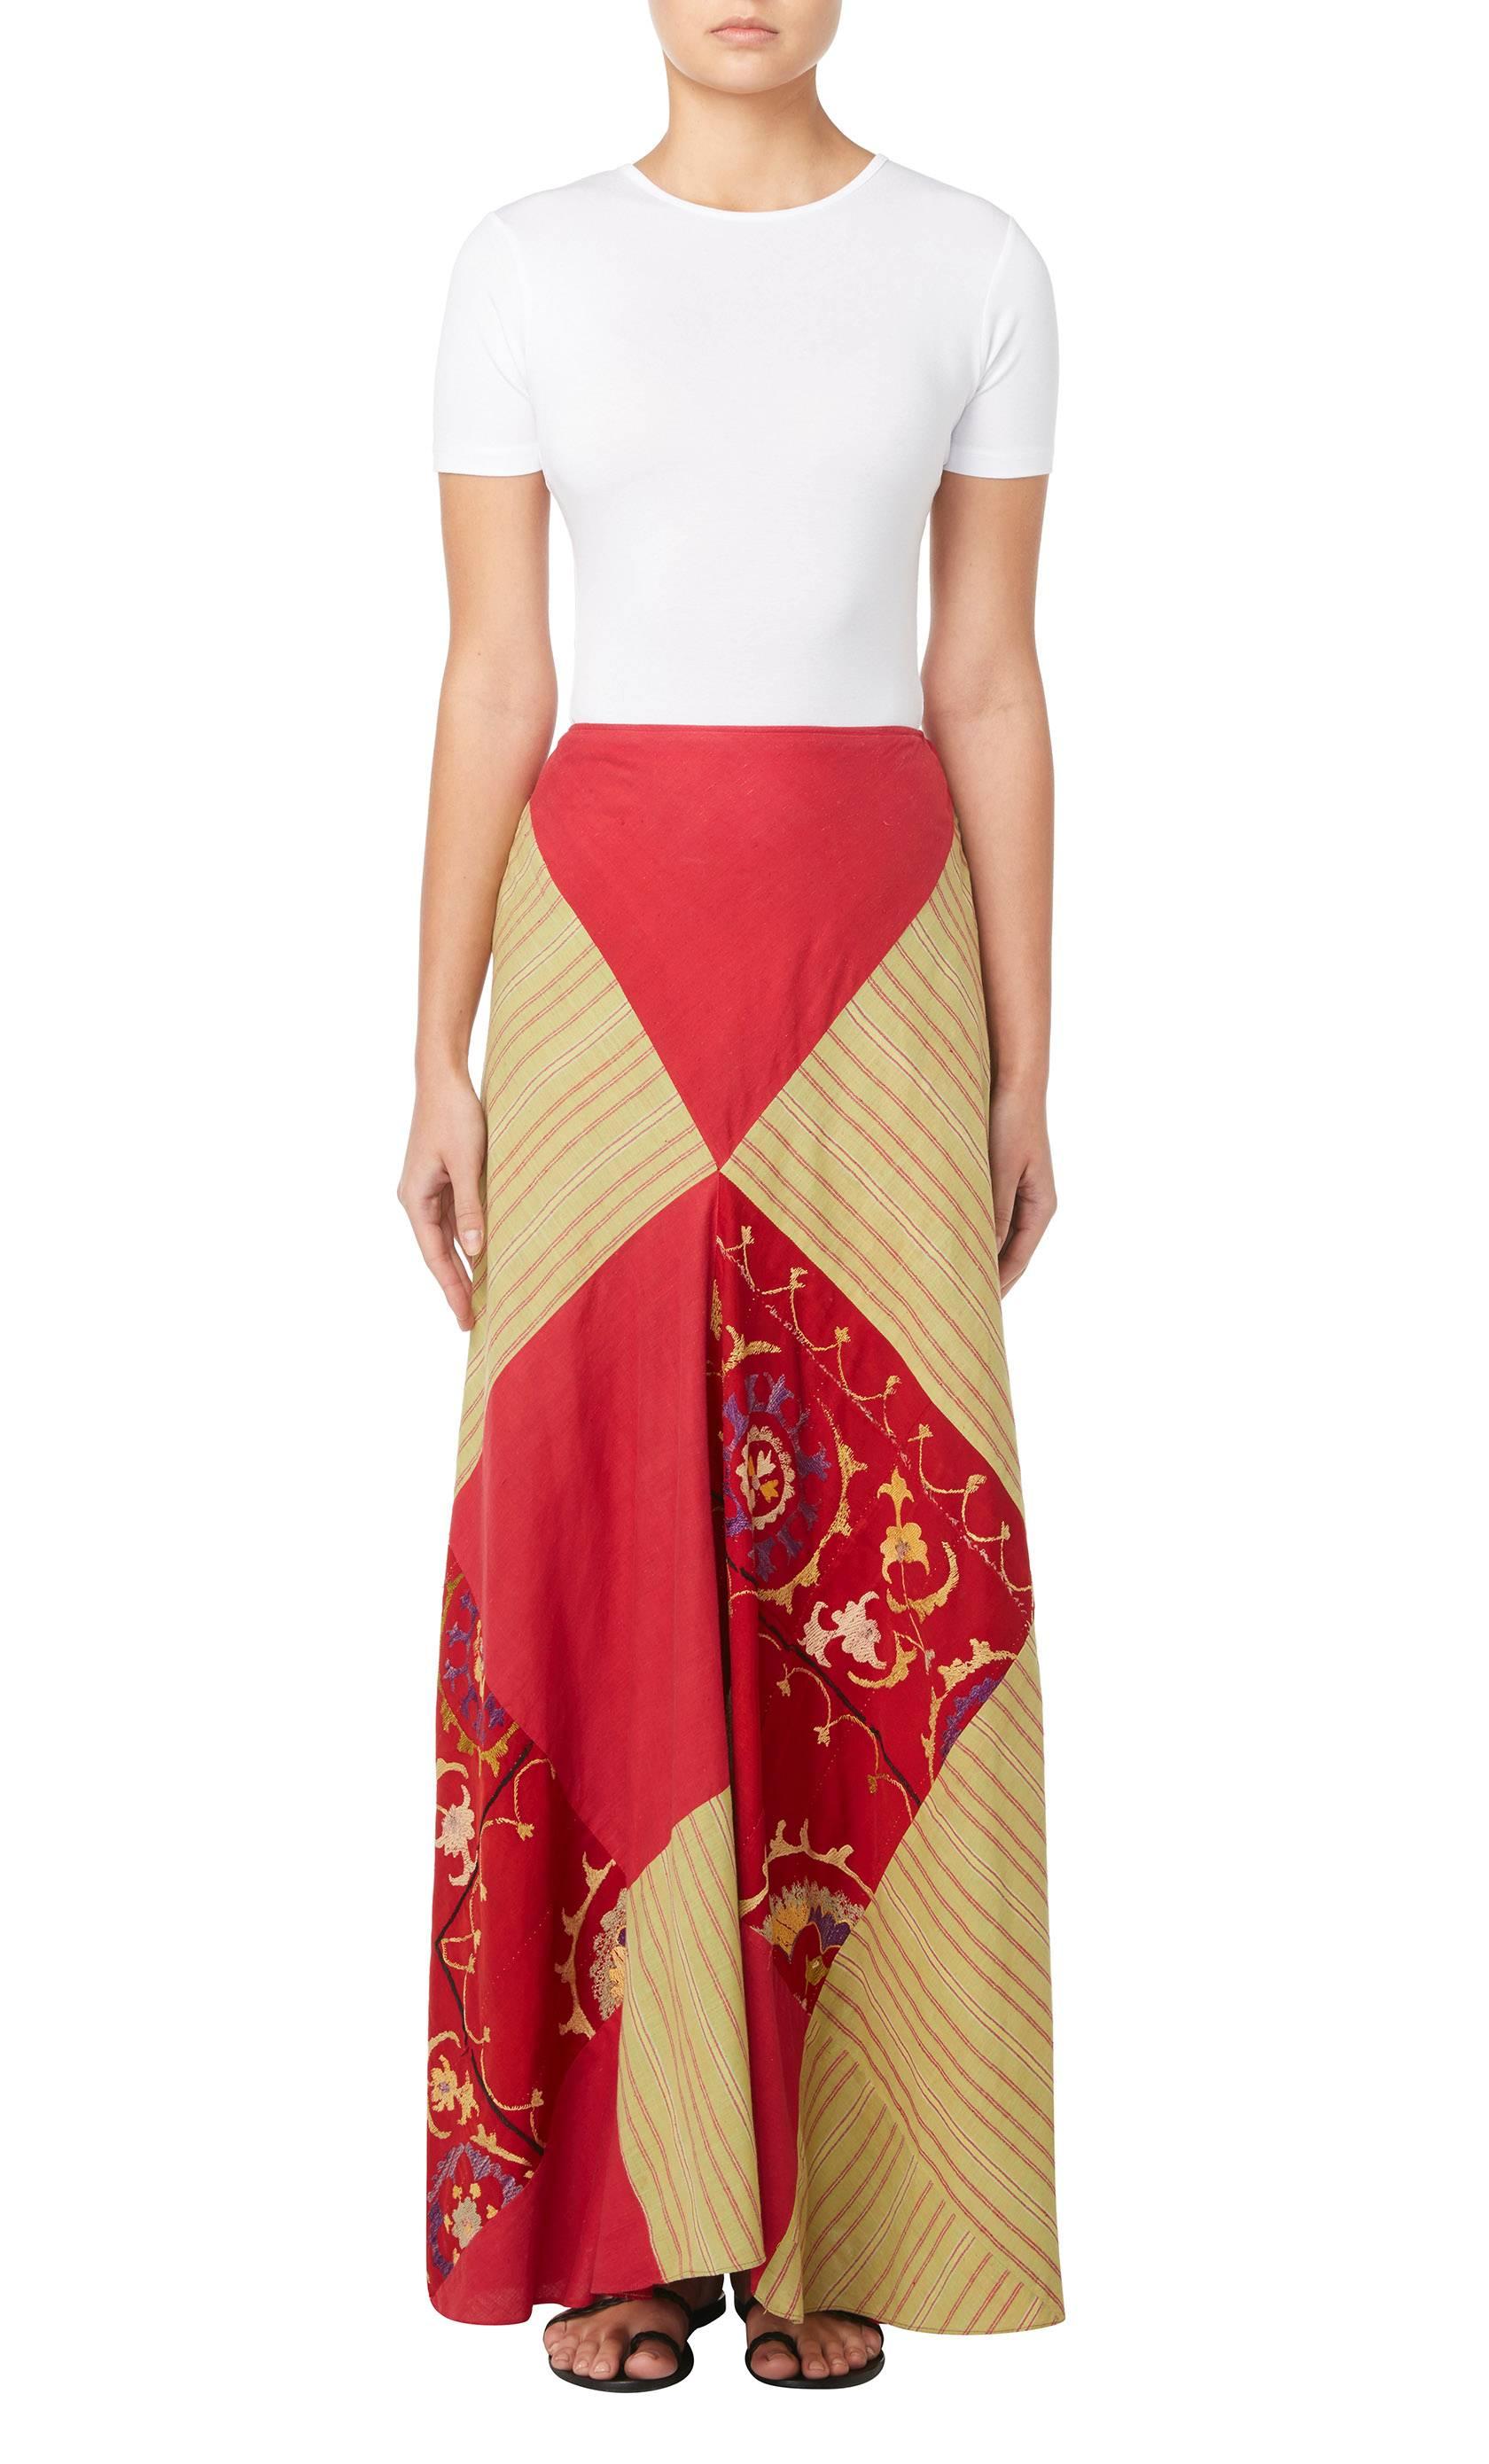 
This patchwork maxi skirt is an excellent example of Thea Porter's bohemian designs, inspired by her travels across the world. This couture skirt is constructed in diamonds patches of green striped madras and red cotton, and featuring intricate